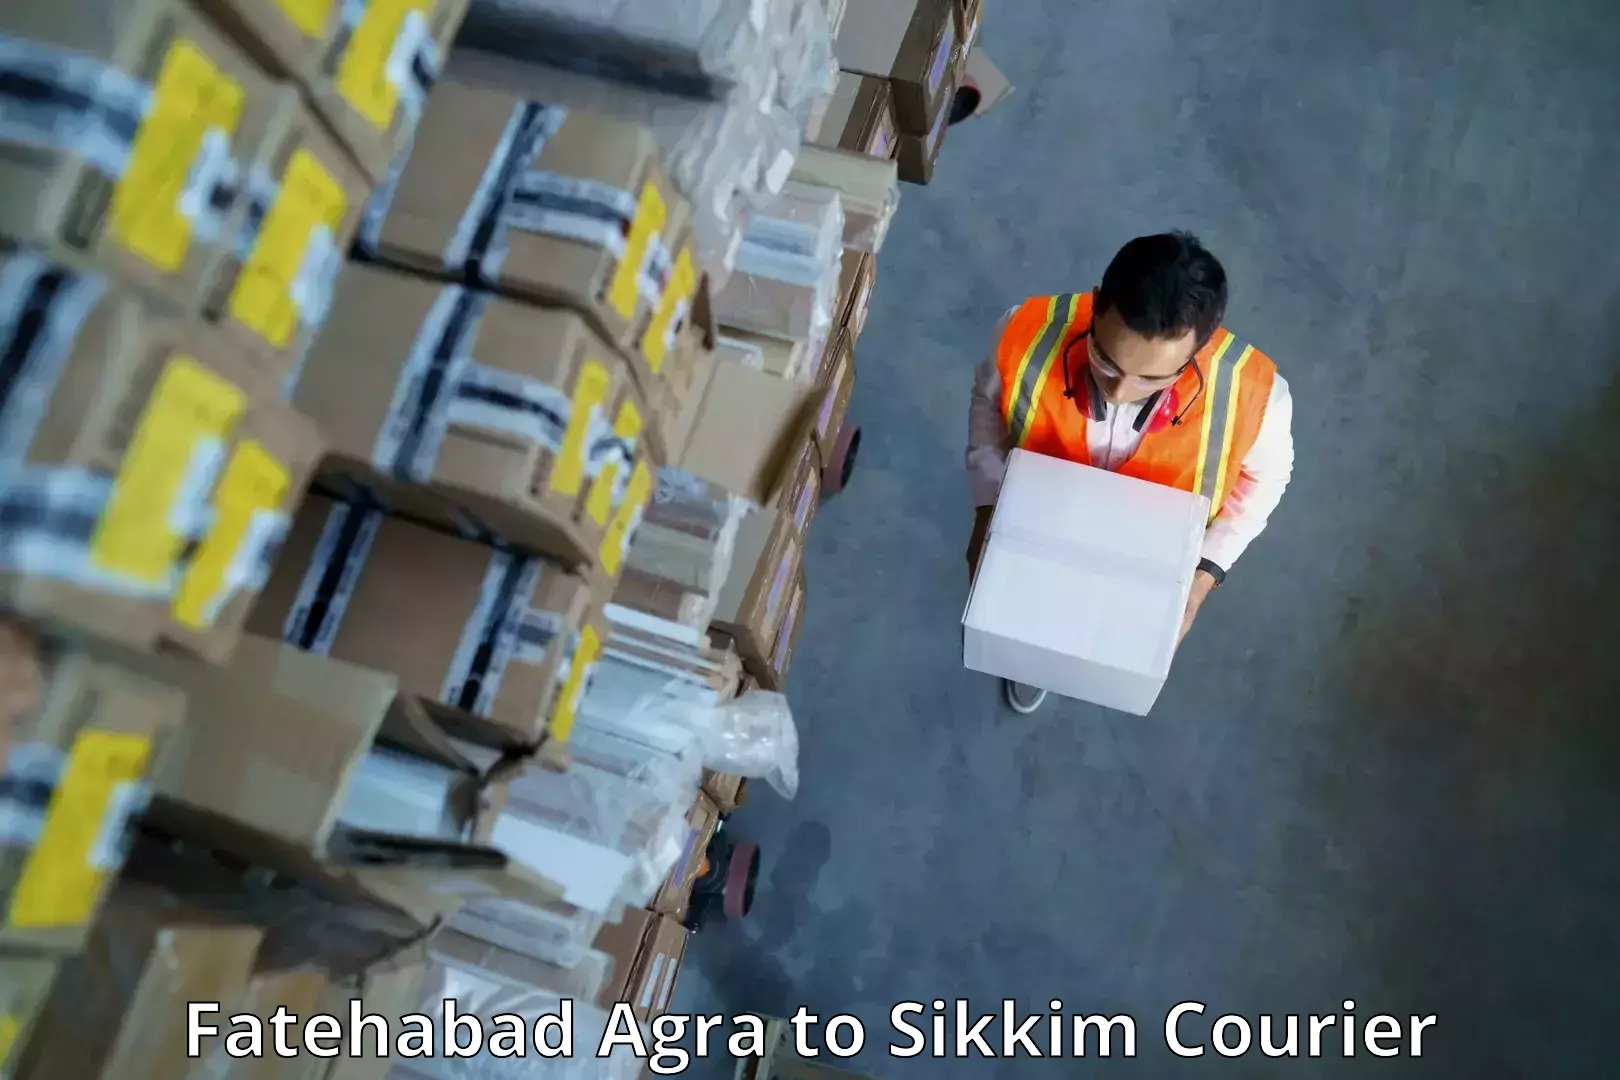 Doorstep delivery service Fatehabad Agra to East Sikkim